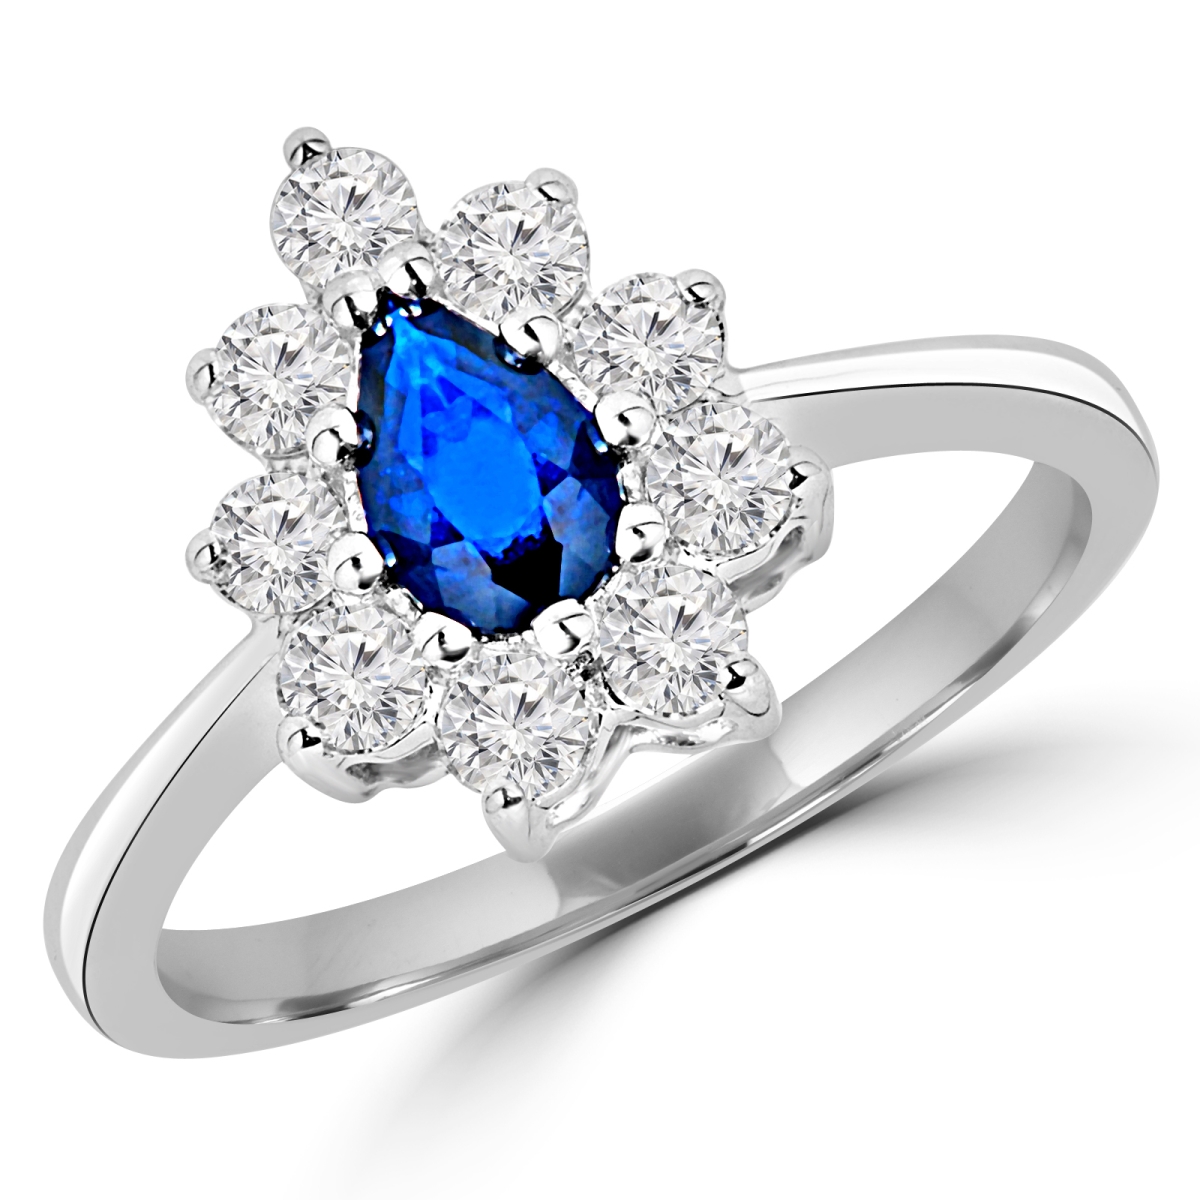 Picture of Majesty Diamonds MD180236-9 1 CTW Pear Blue Sapphire Halo Cocktail Ring in 14K White Gold - Size 9